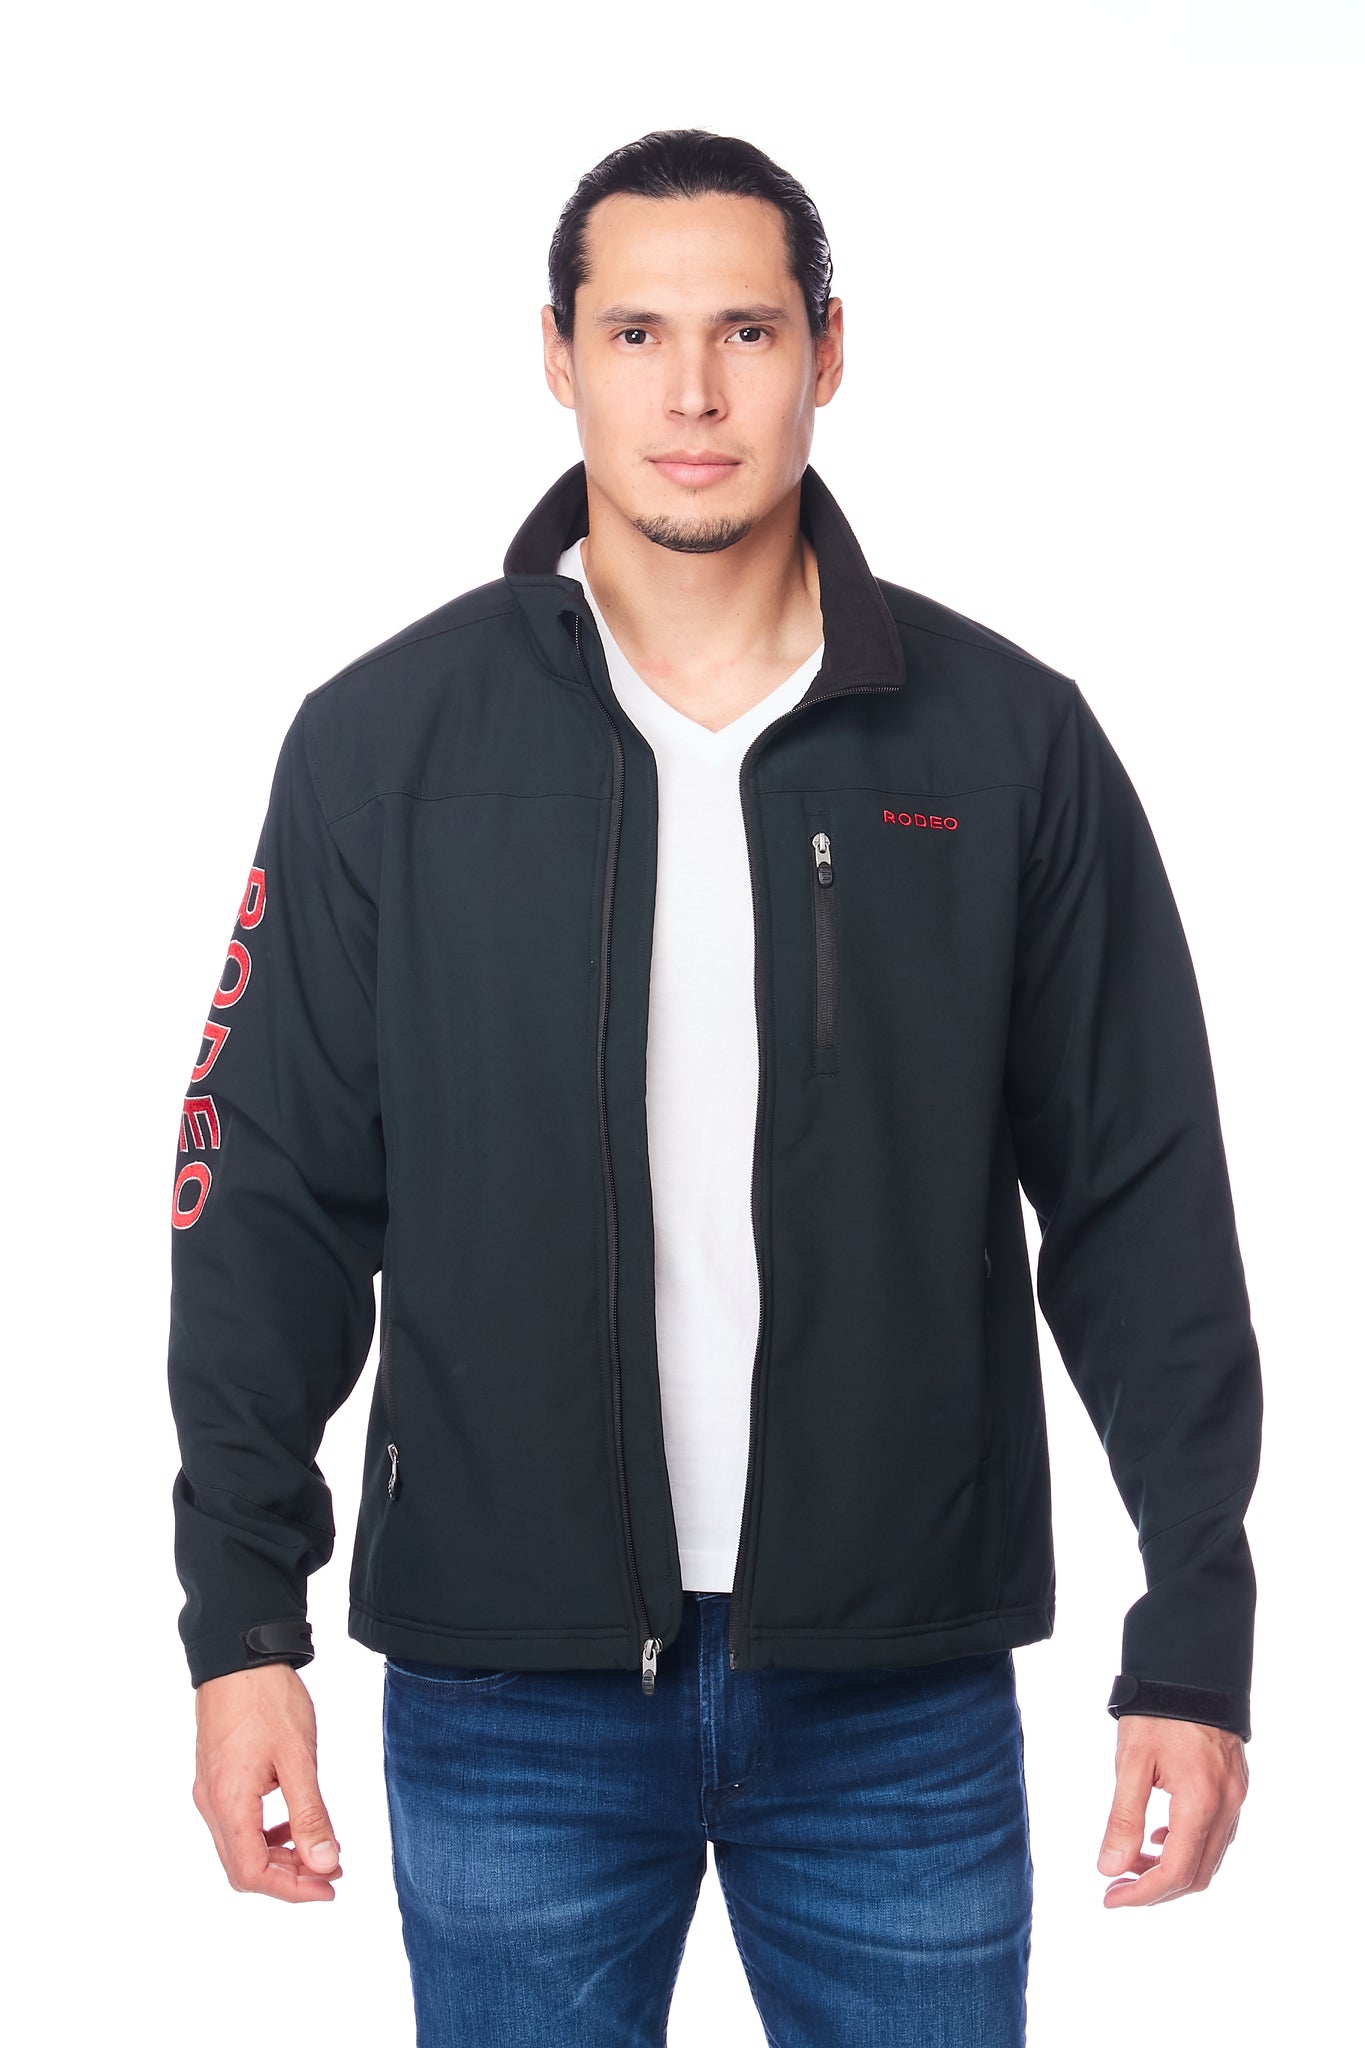 Men's Soft Shell Bonded Jacket With Embroidery -NJ650EMB-BLACK-RED